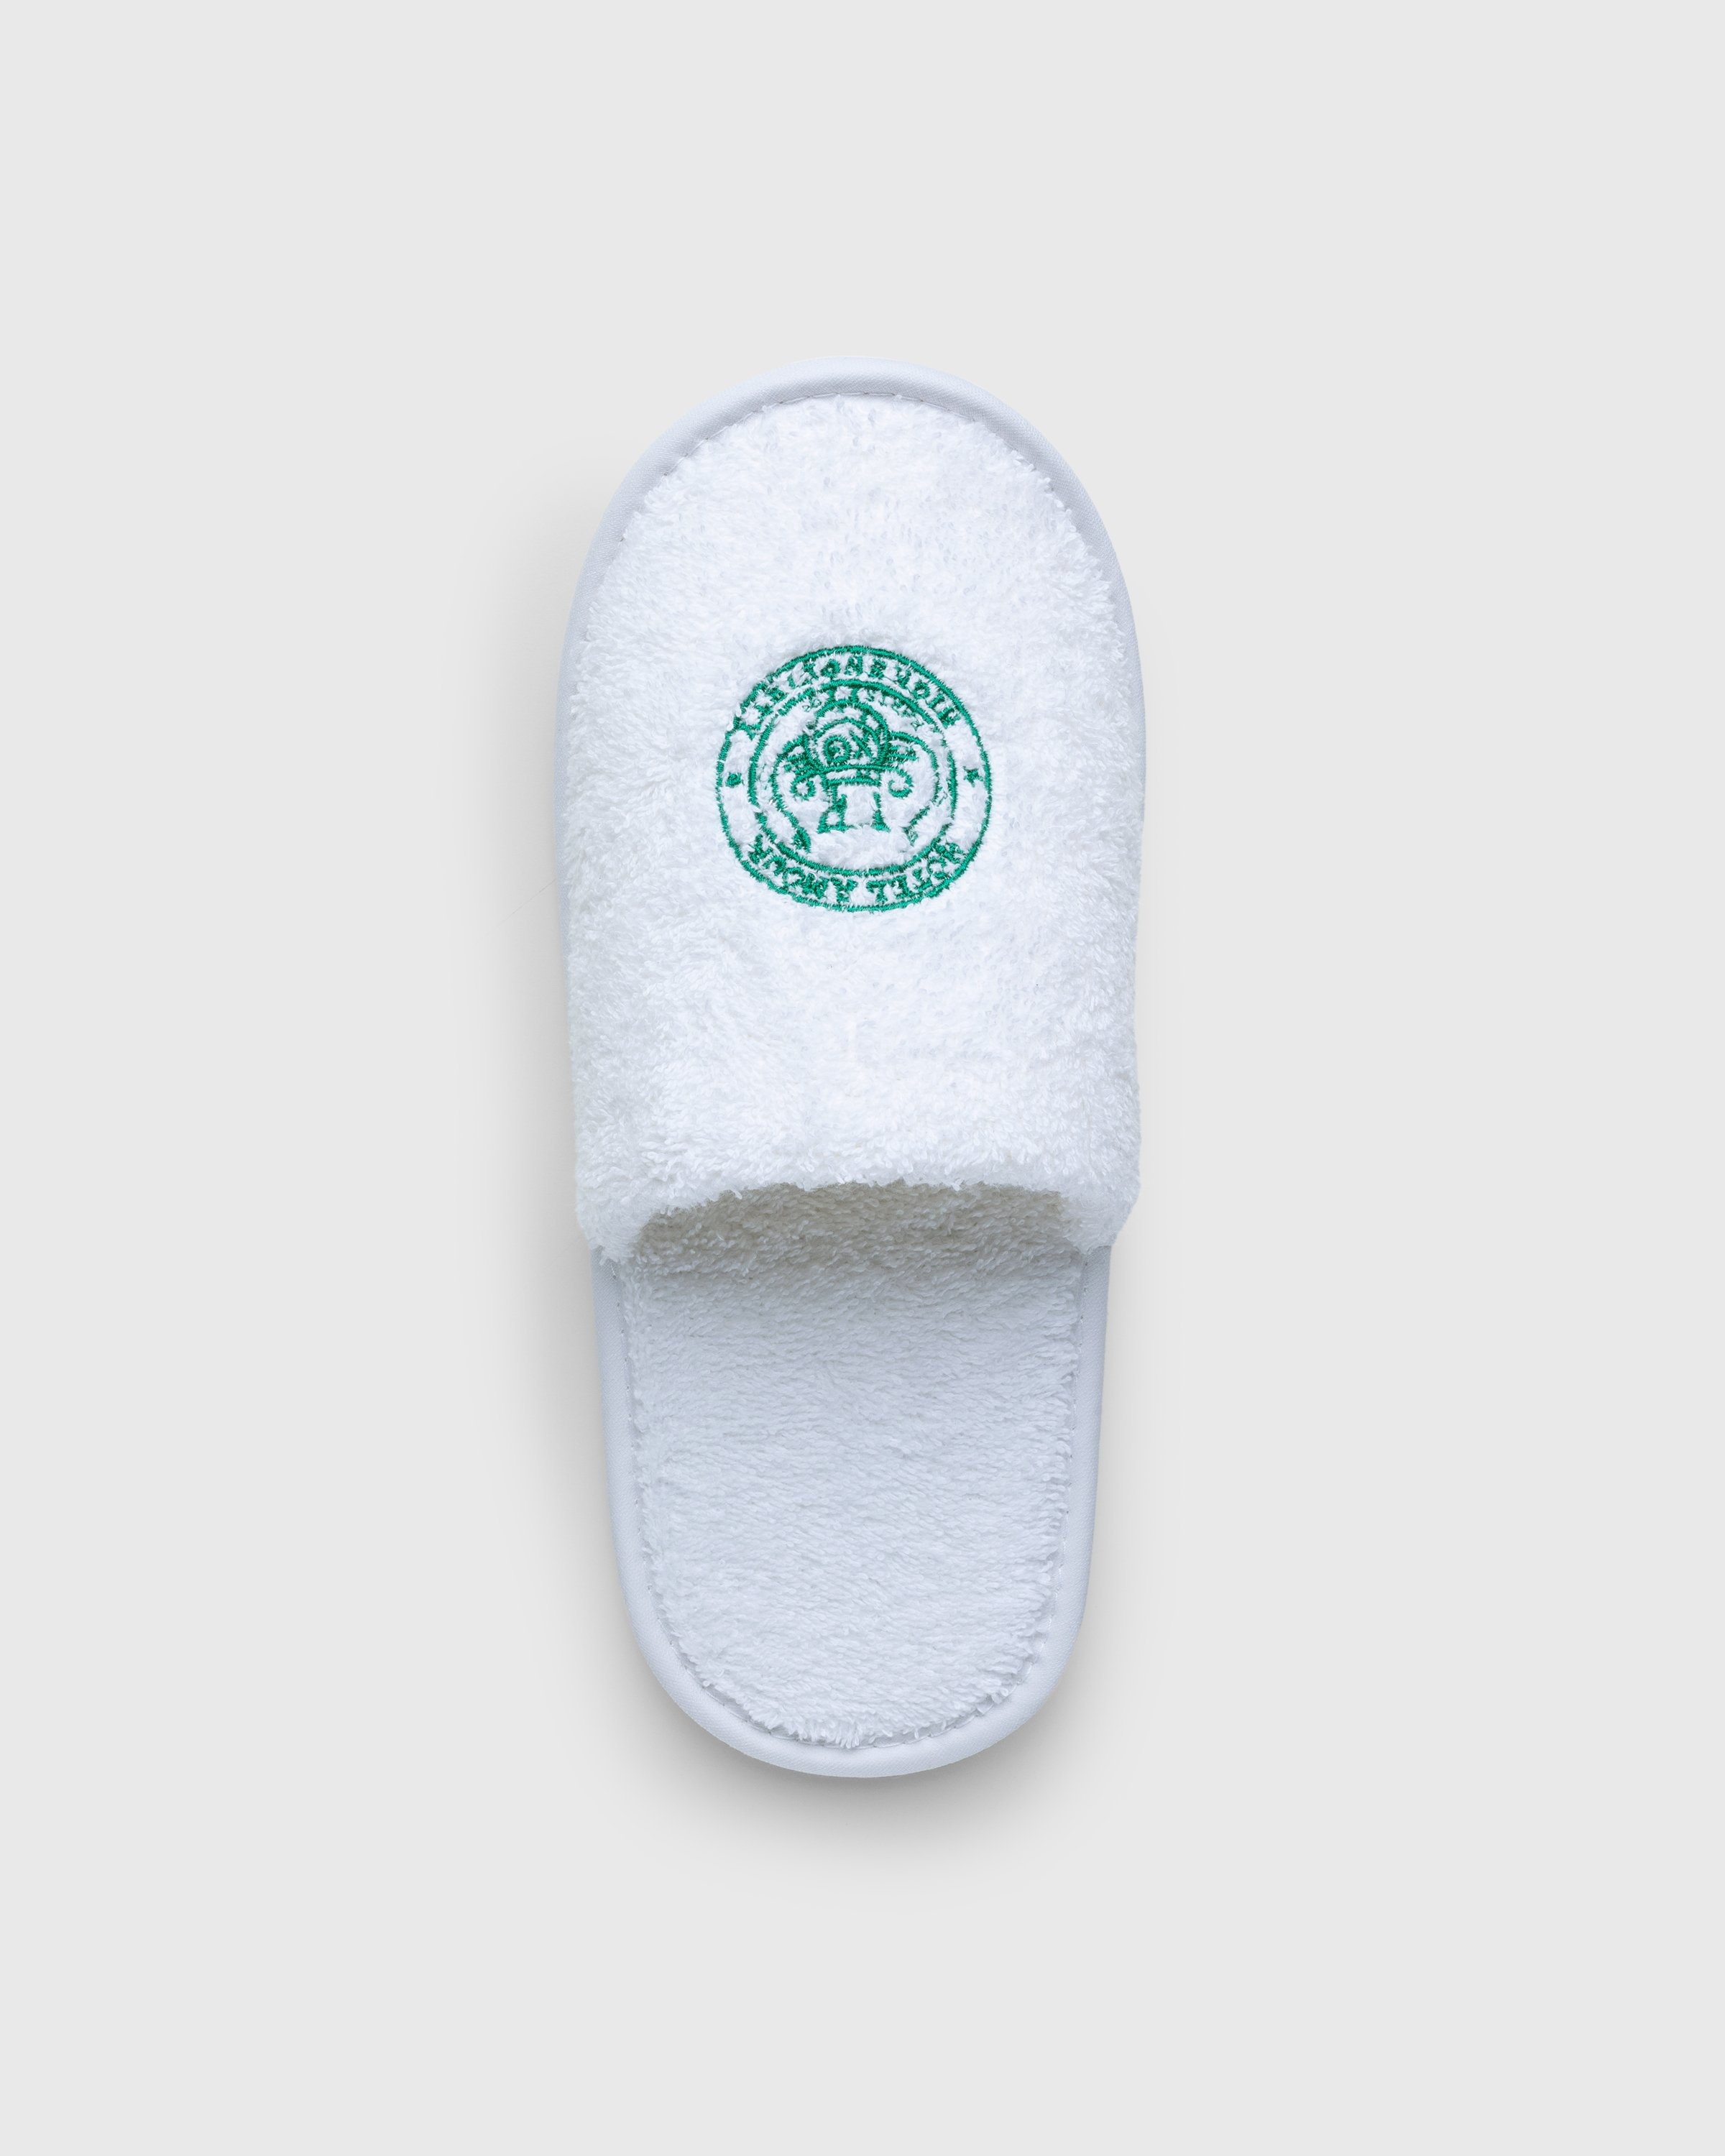 Hotel Amour x Highsnobiety – Not In Paris 4 Slippers White - Slippers - White - Image 1